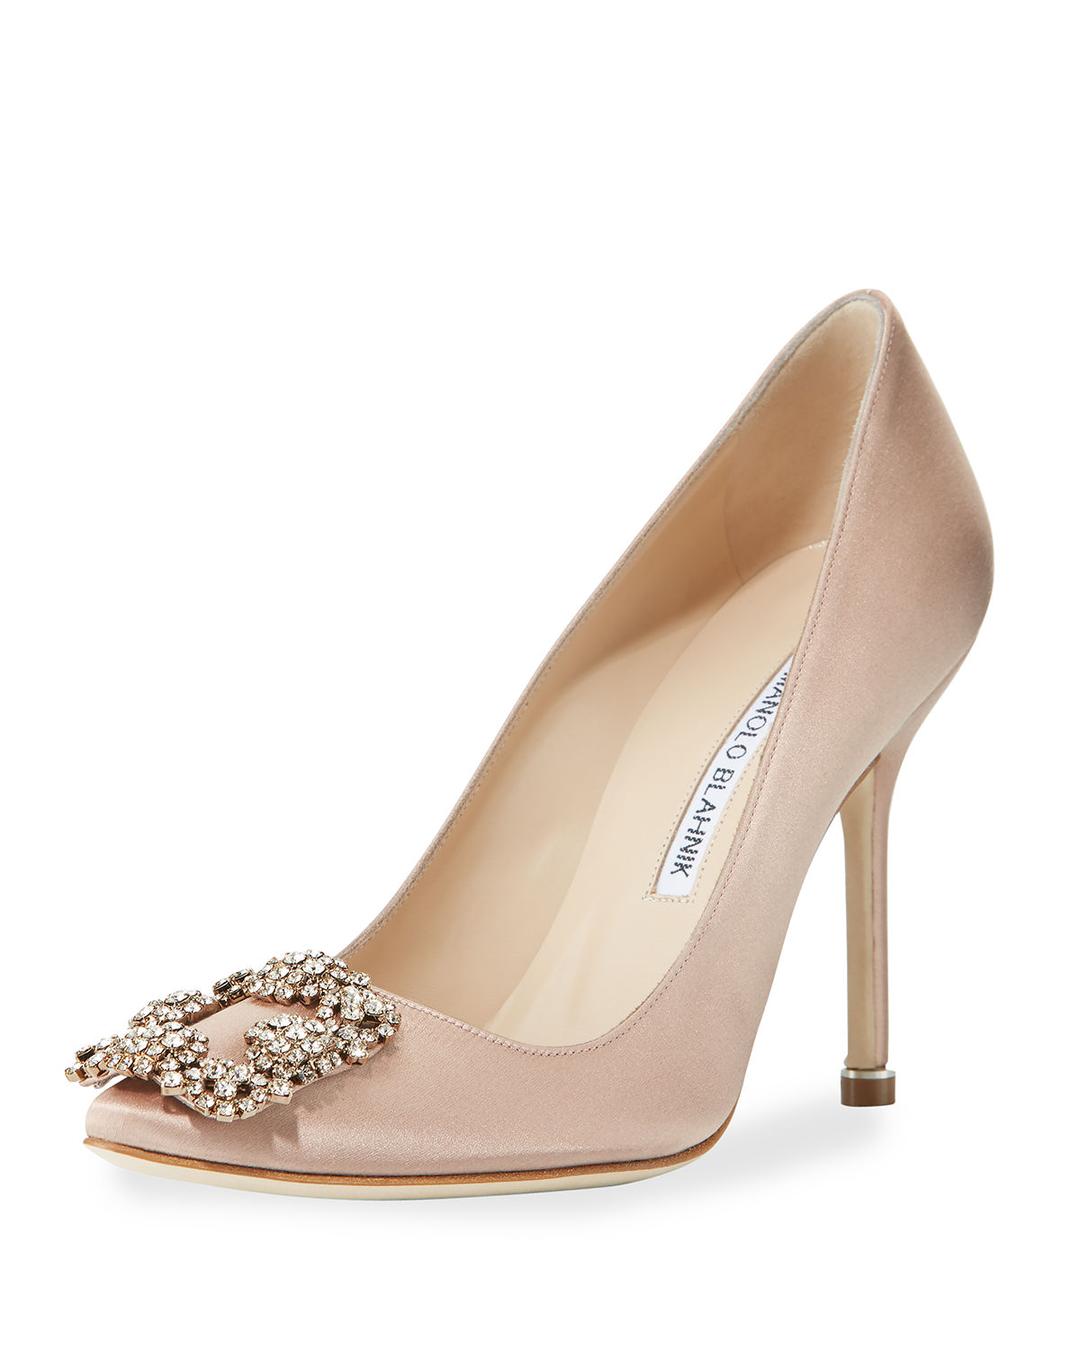 17 Nude Wedding Shoes Perfect for Any 